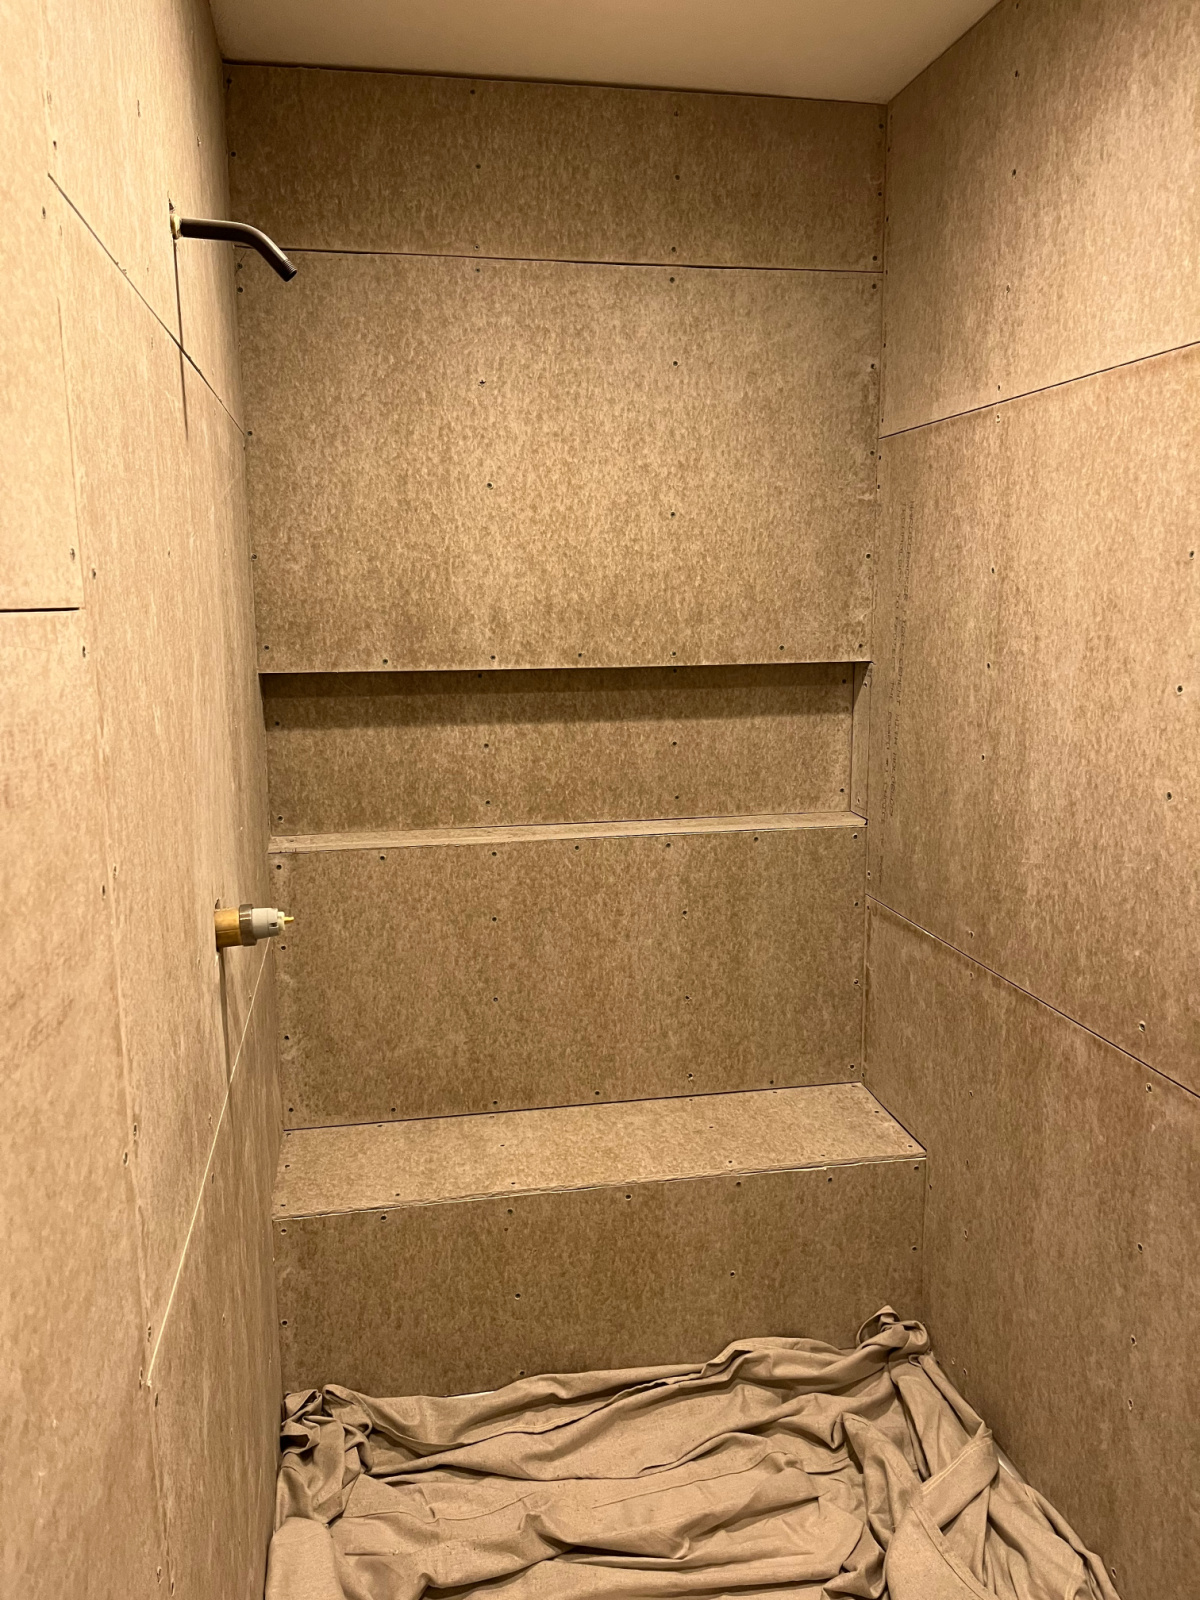 Cement board installed in shower on walls, shelf, and bench seat